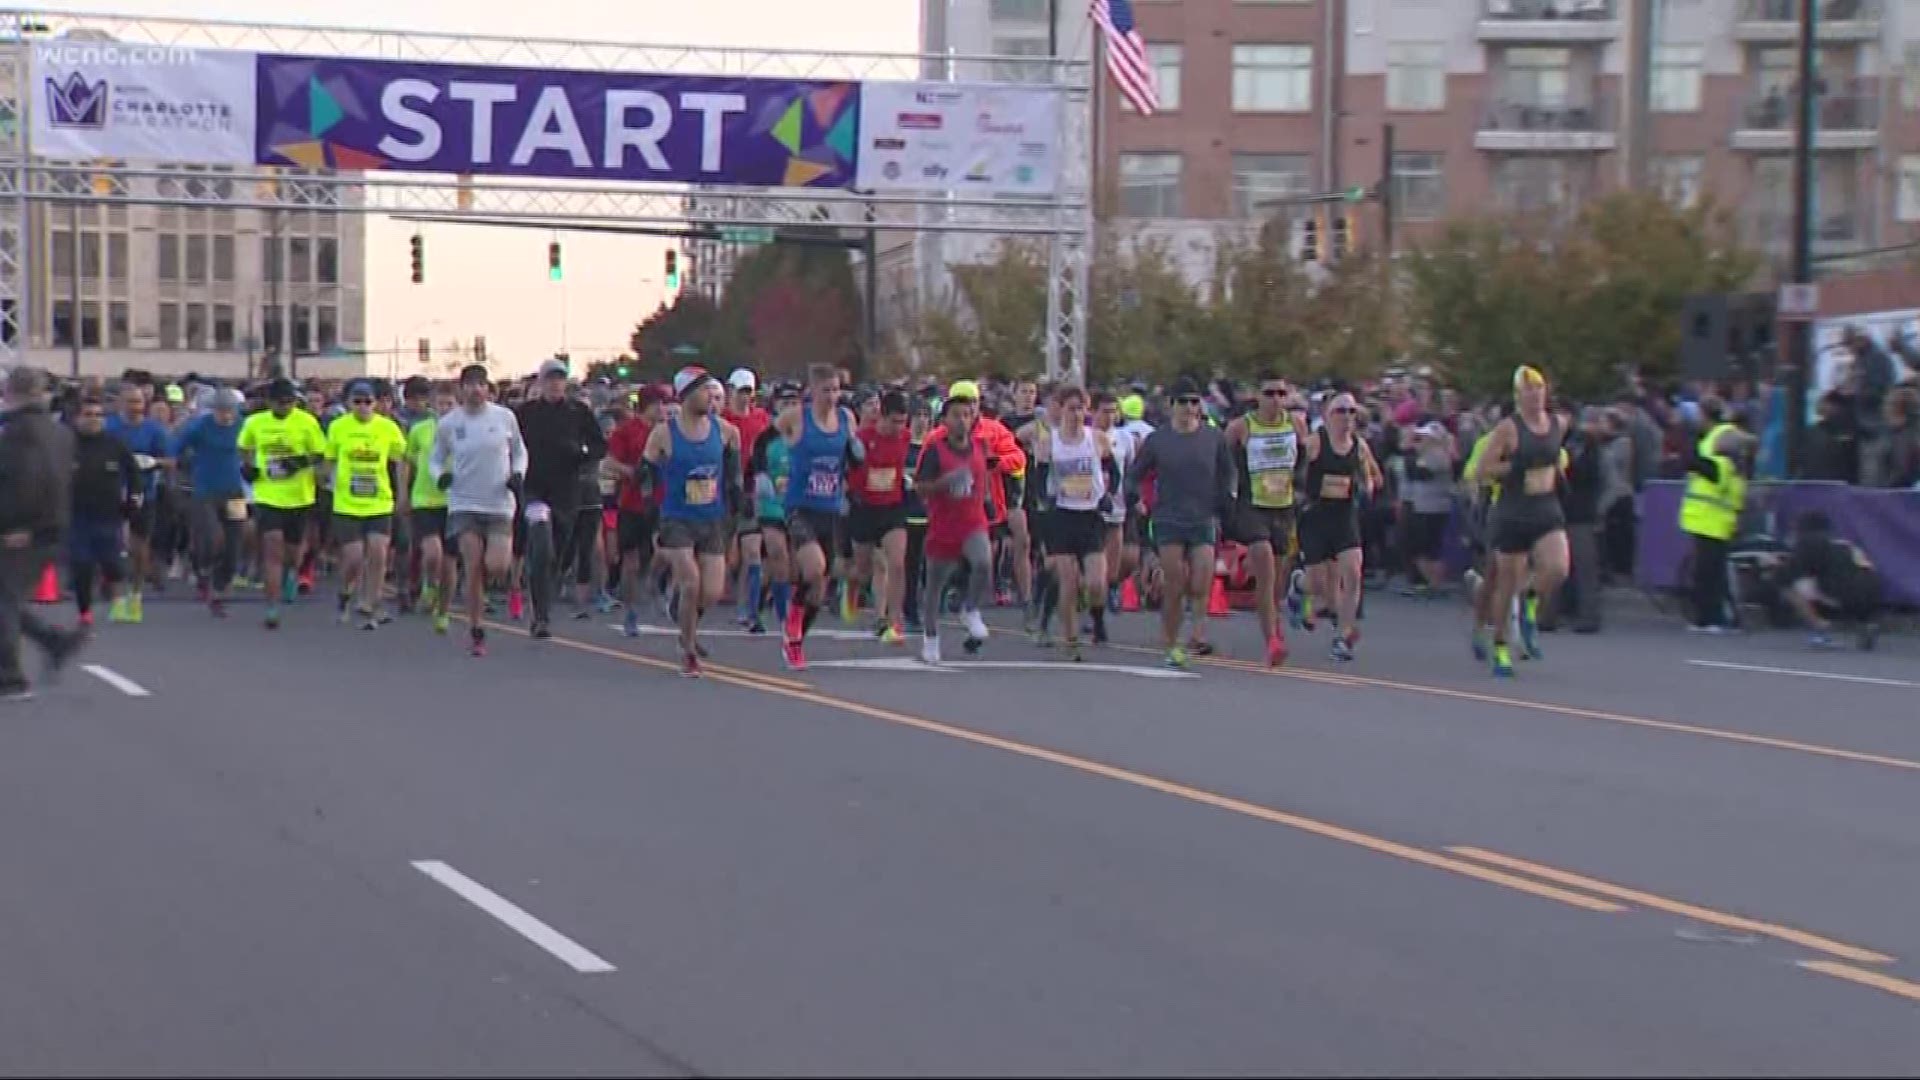 The freezing cold weather and tightened security didn't dampen the runners' enthusiasm during the Novant Health Charlotte Marathon Saturday morning.